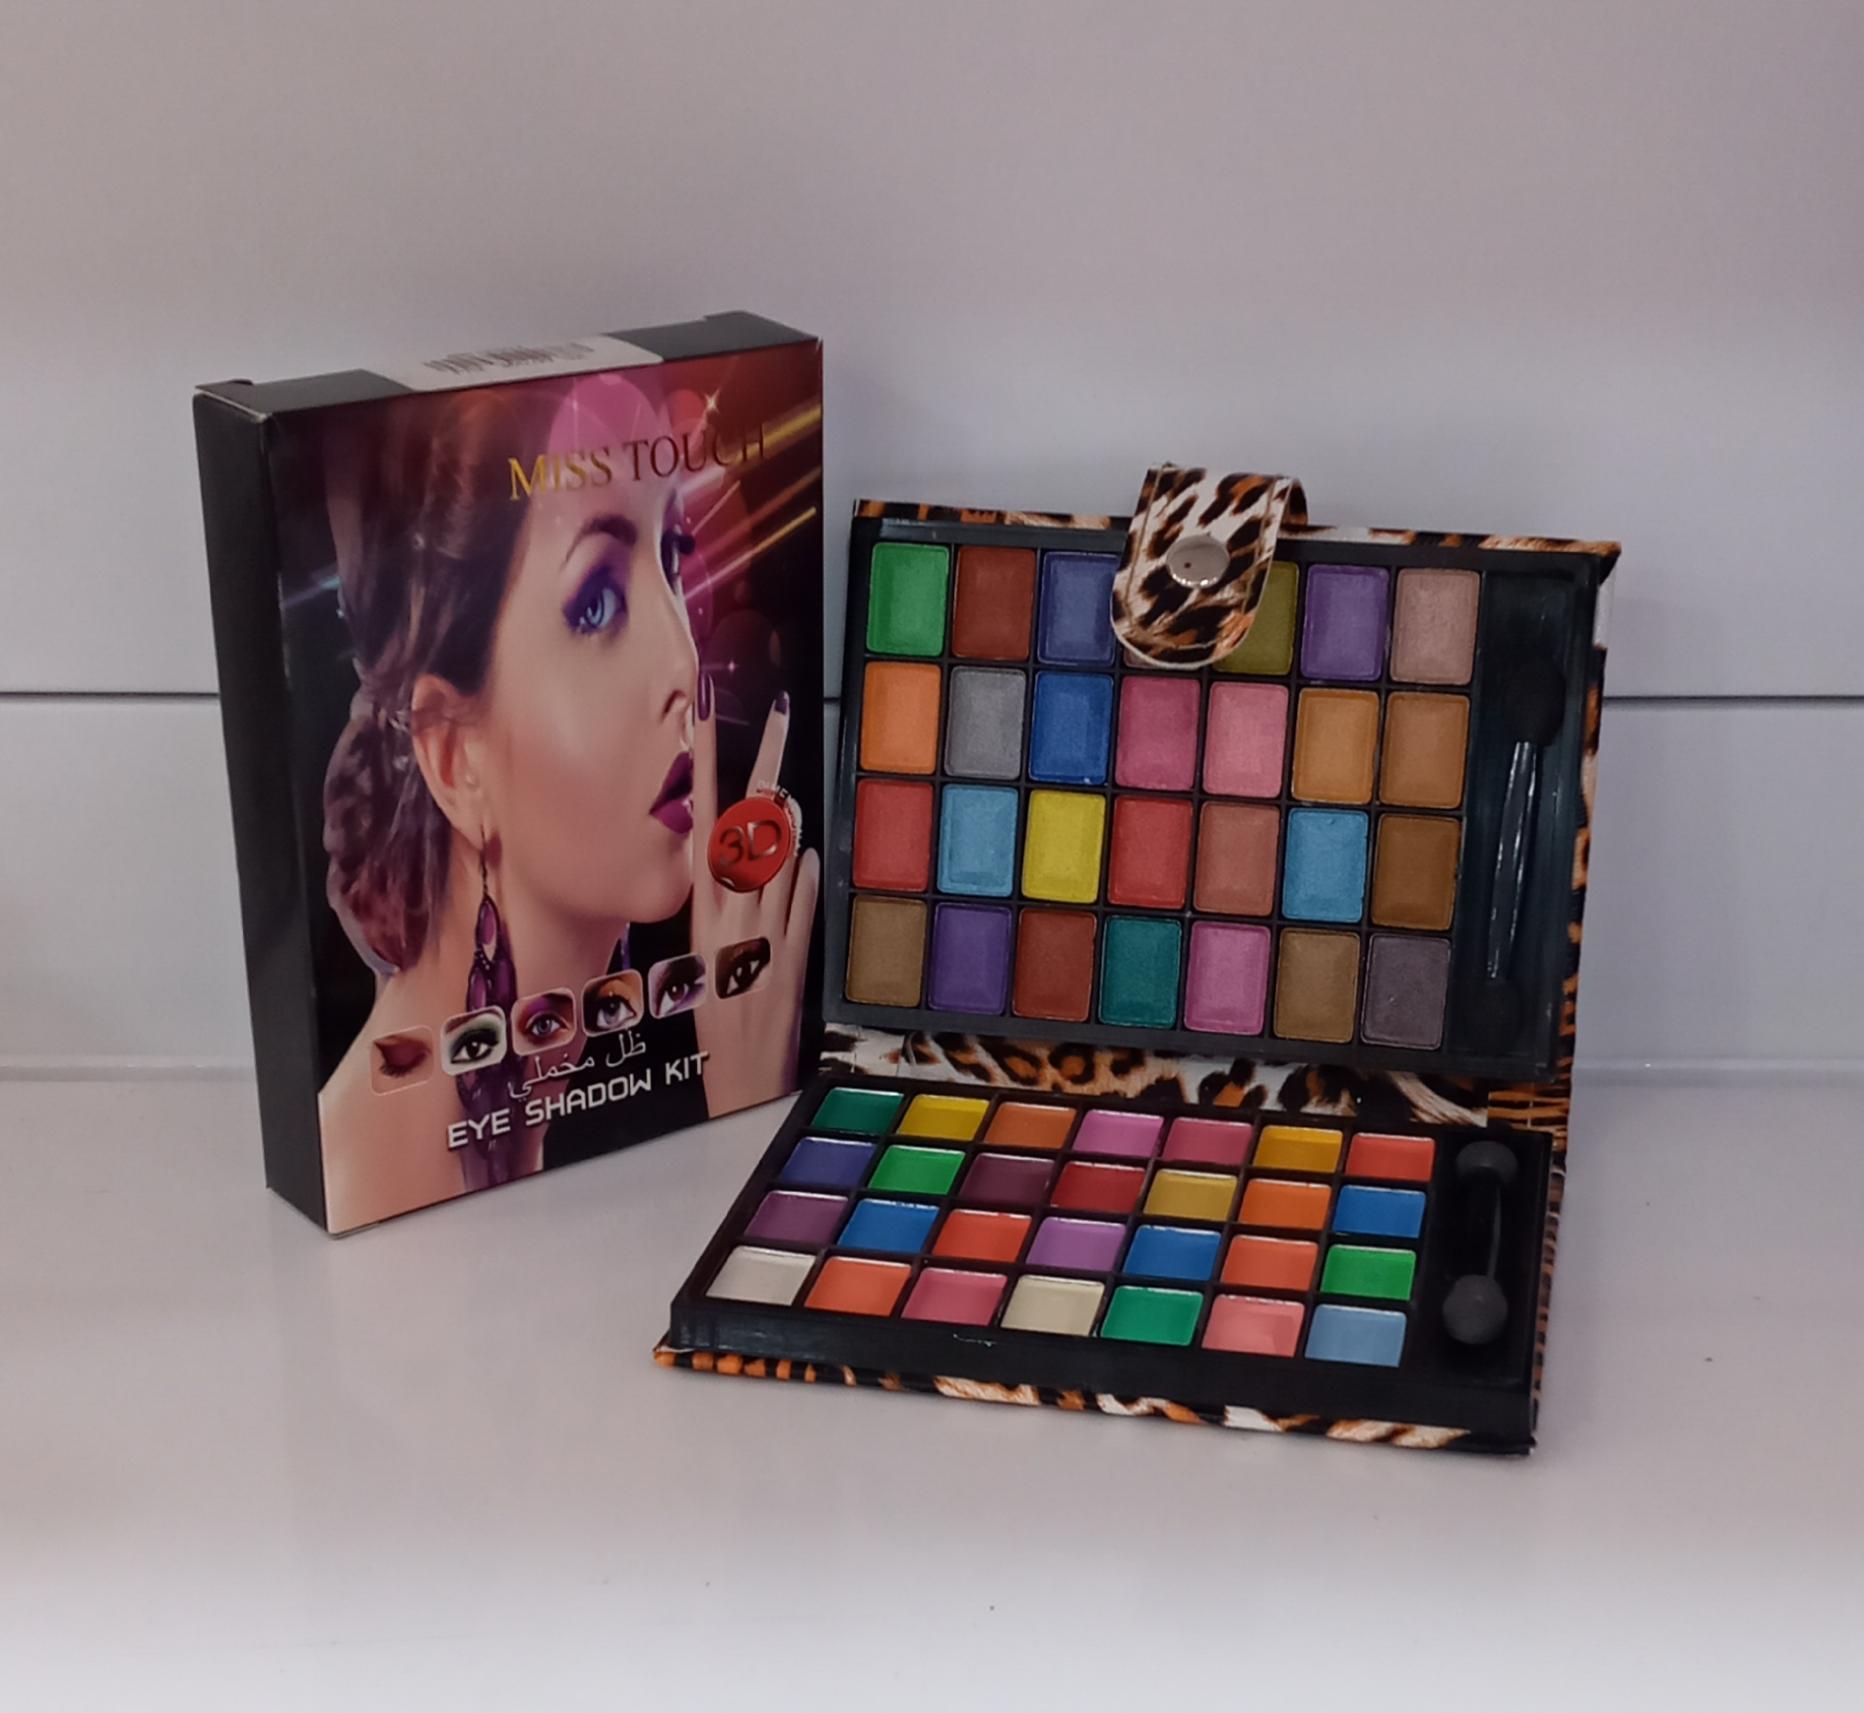 MISS TOUCH EYE SHADOW KIT